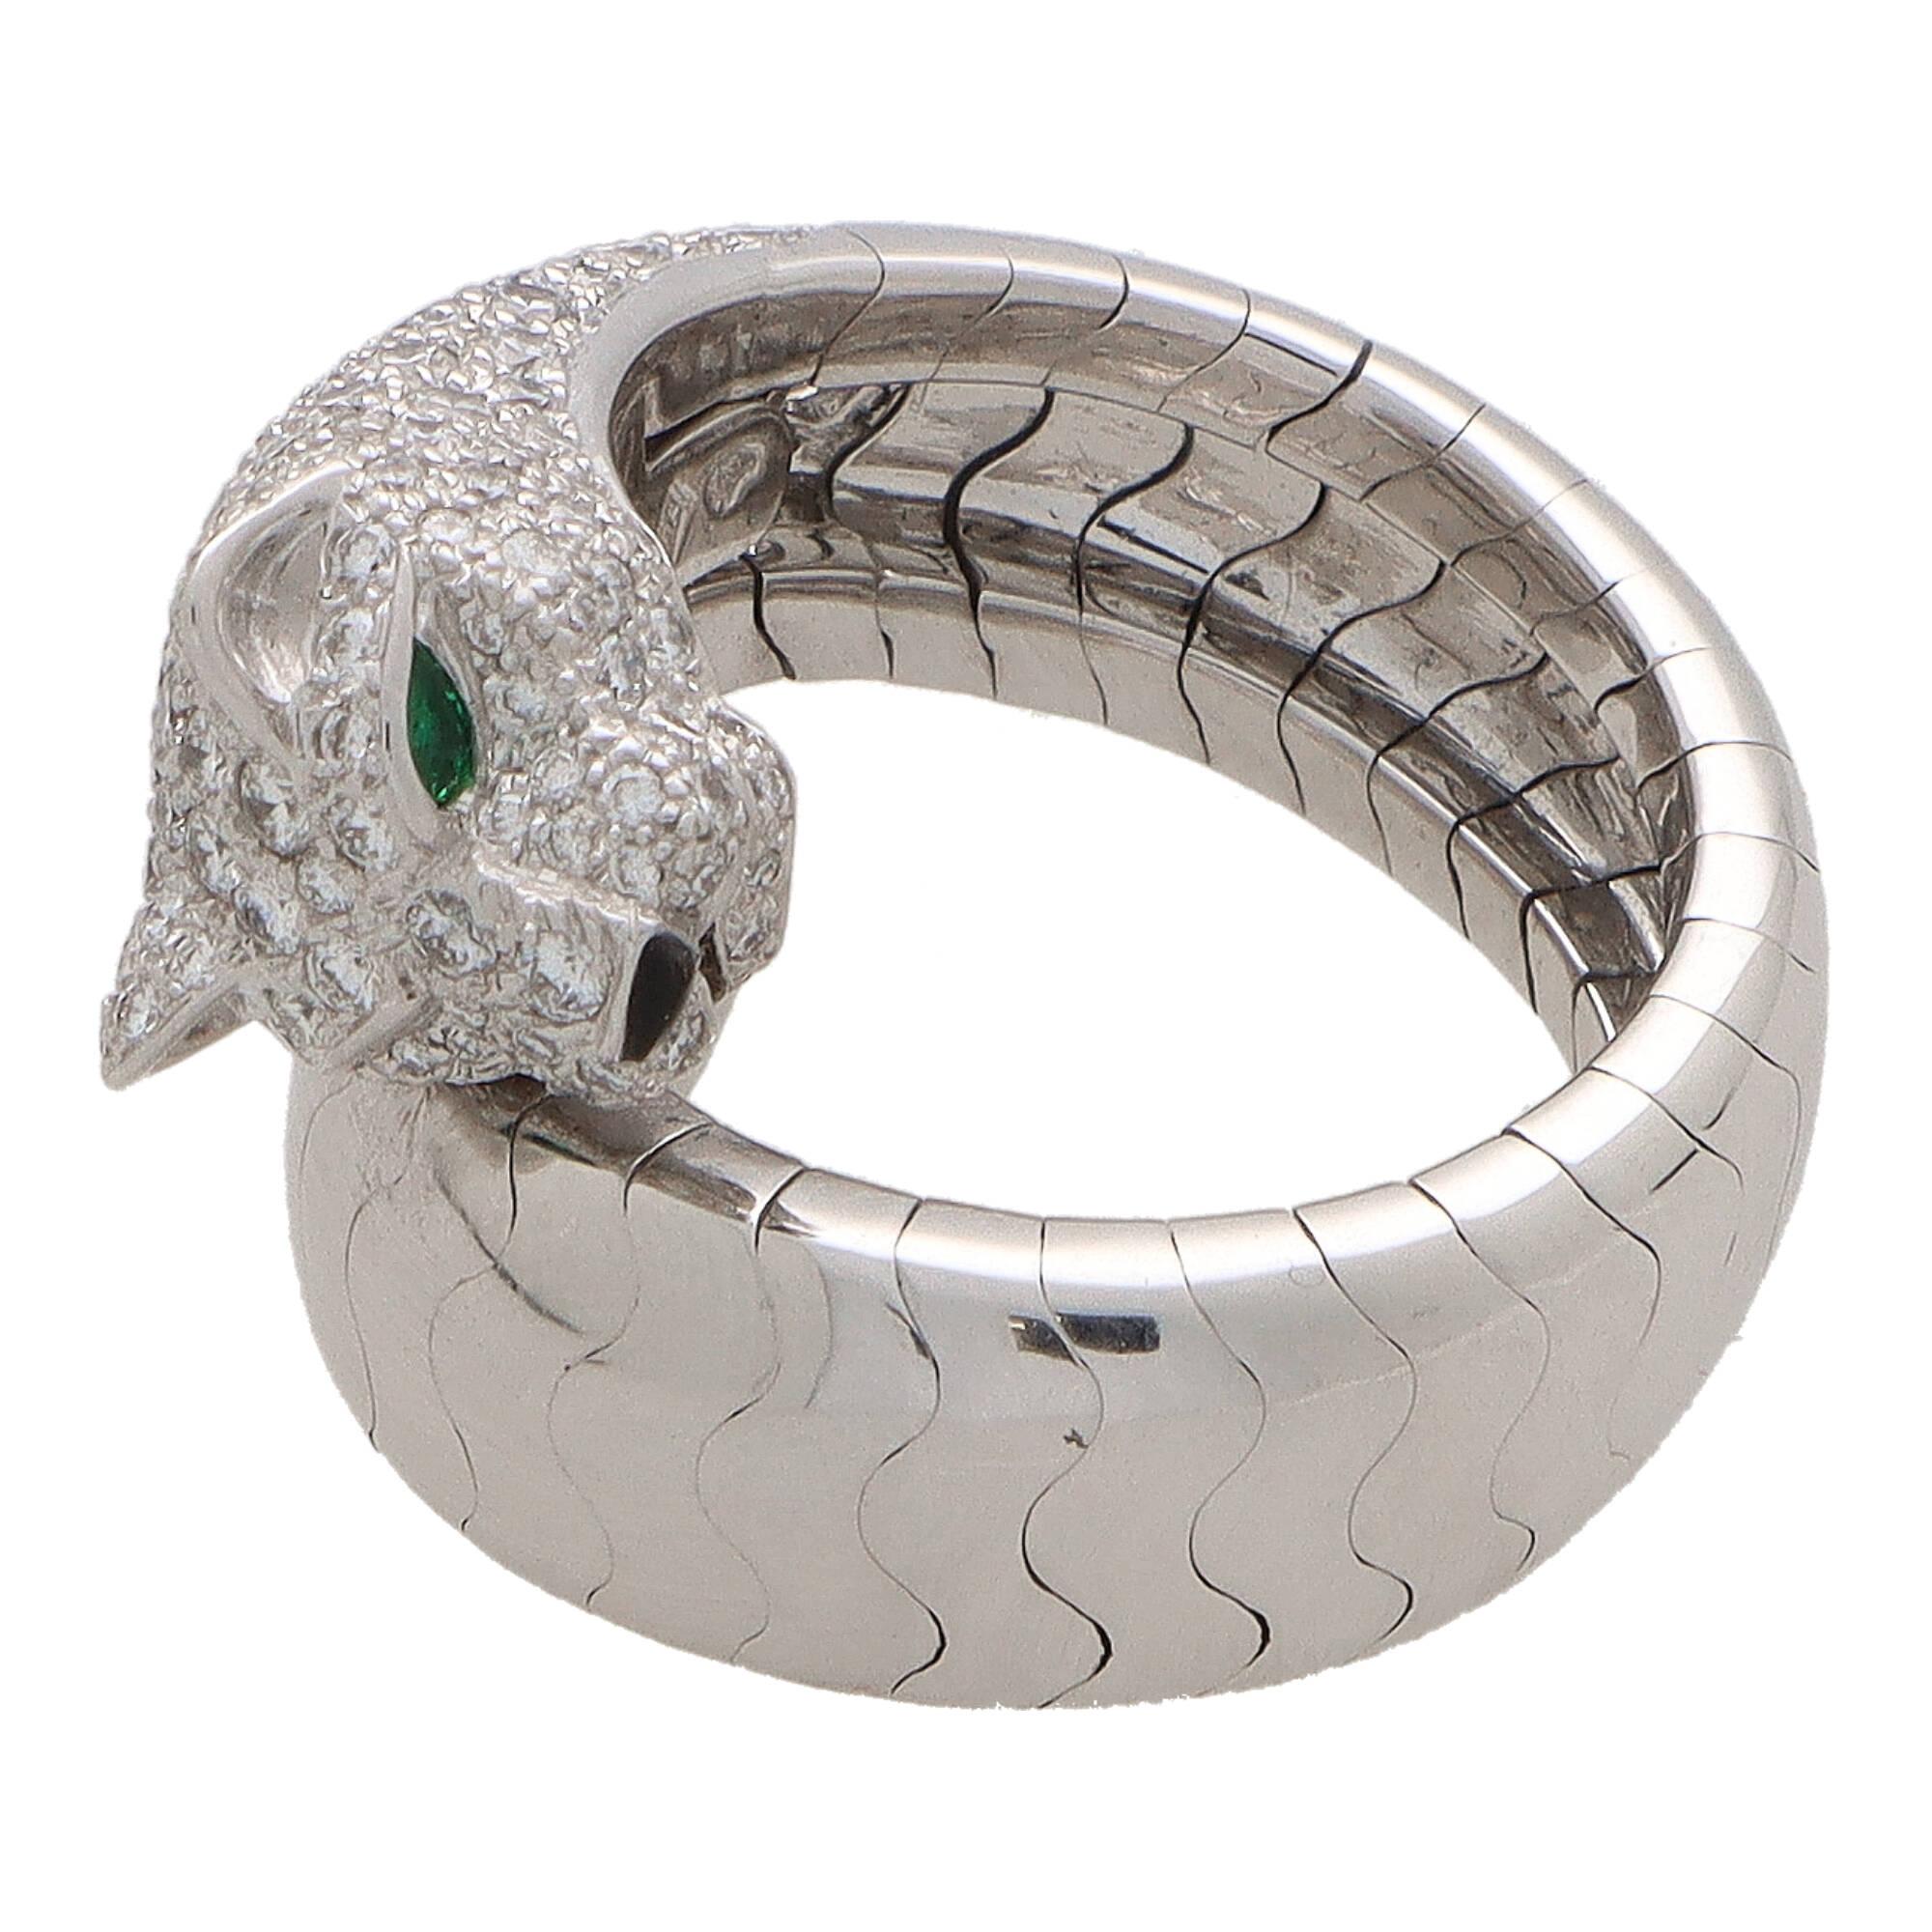 Round Cut Vintage Cartier Panthere Lakarda Diamond and Emerald Panther Ring in White Gold For Sale